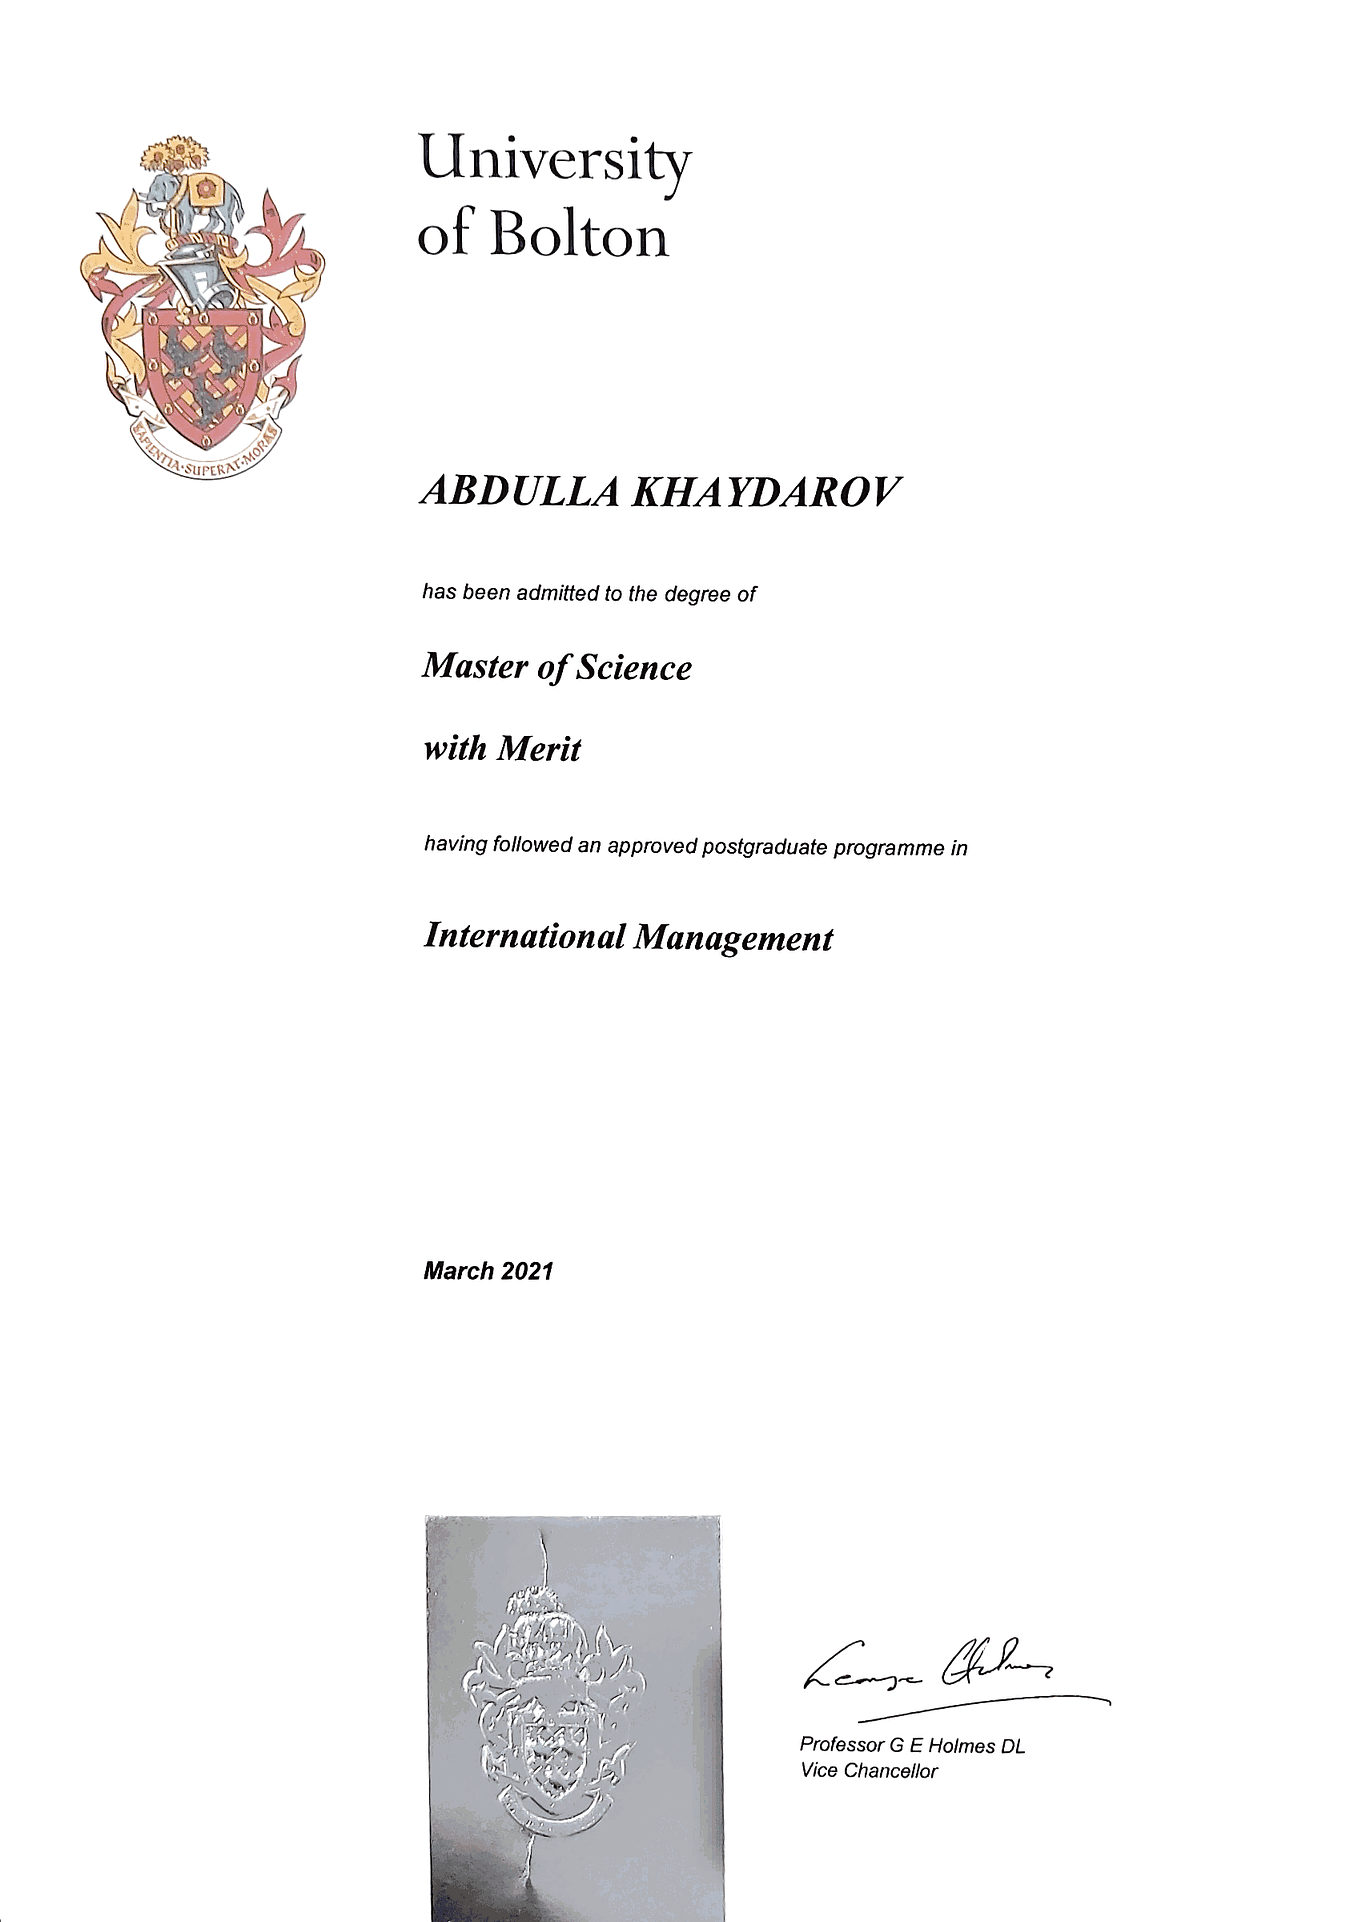 My Masters degree delivered from the UK